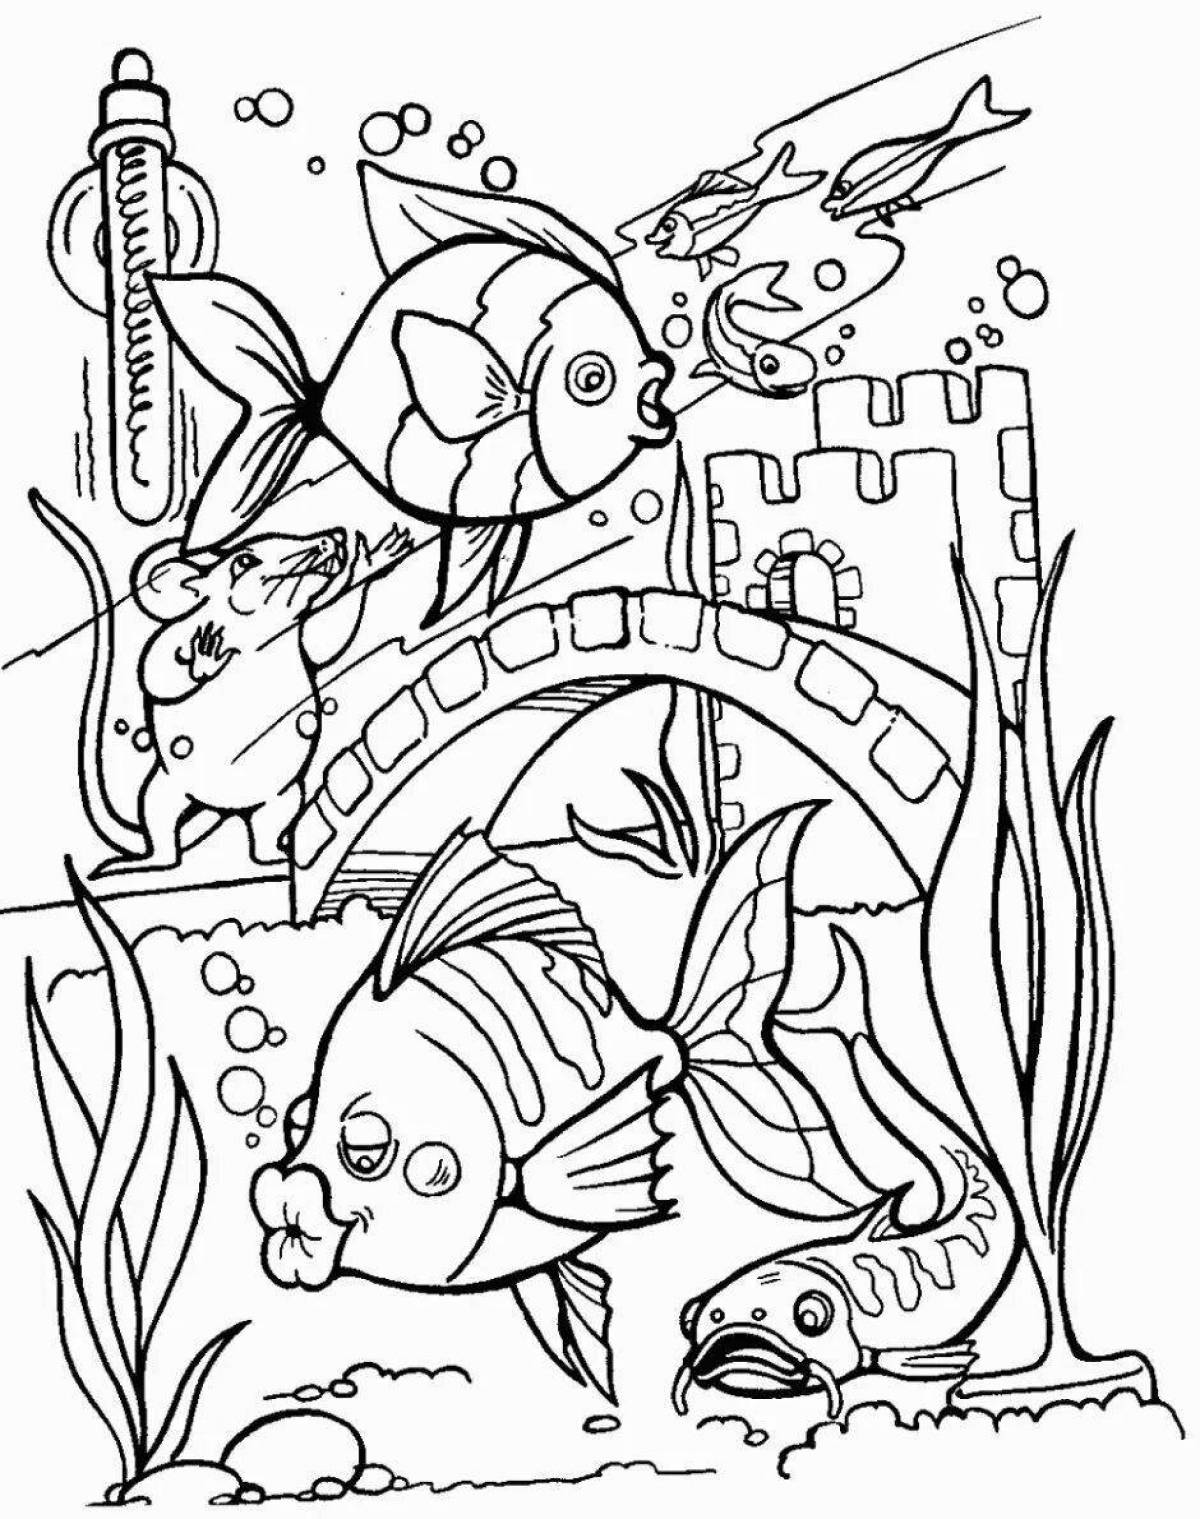 Amazing aquarium fish coloring pages for 5-6 year olds